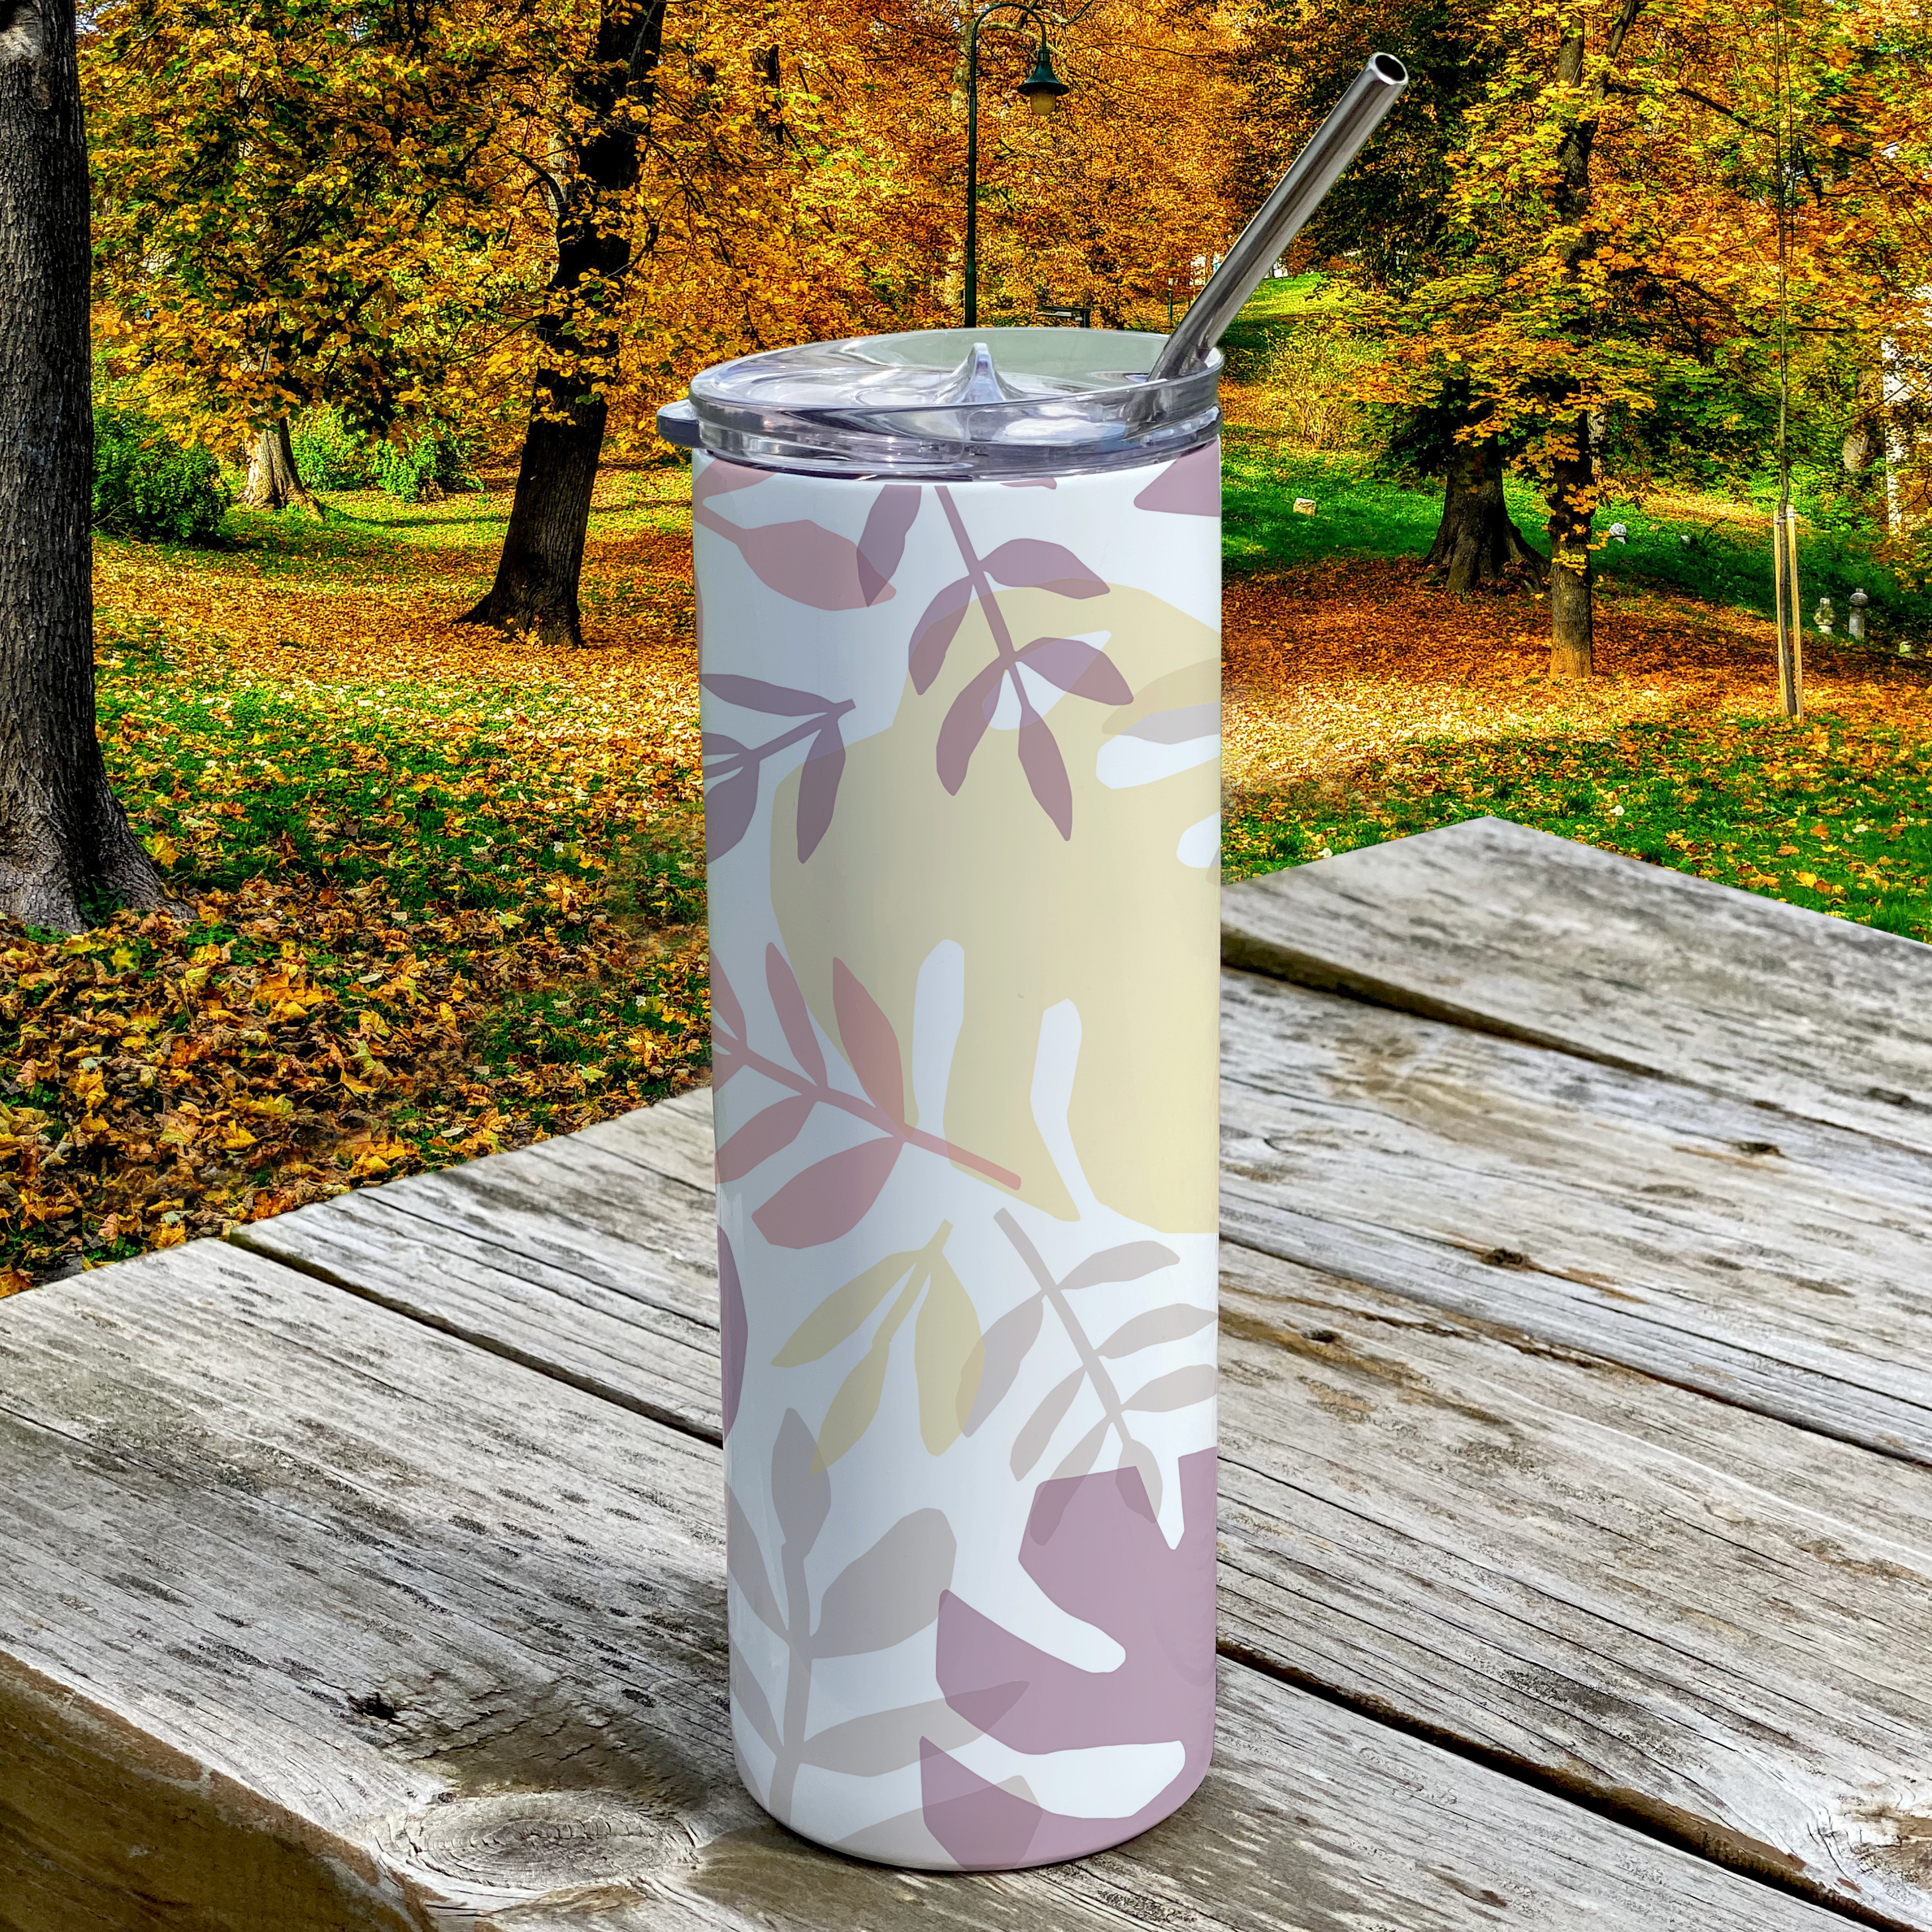 Trend Setters Originals (Pastel Palms) 20 Oz Stainless Steel Travel Tumbler with Straw